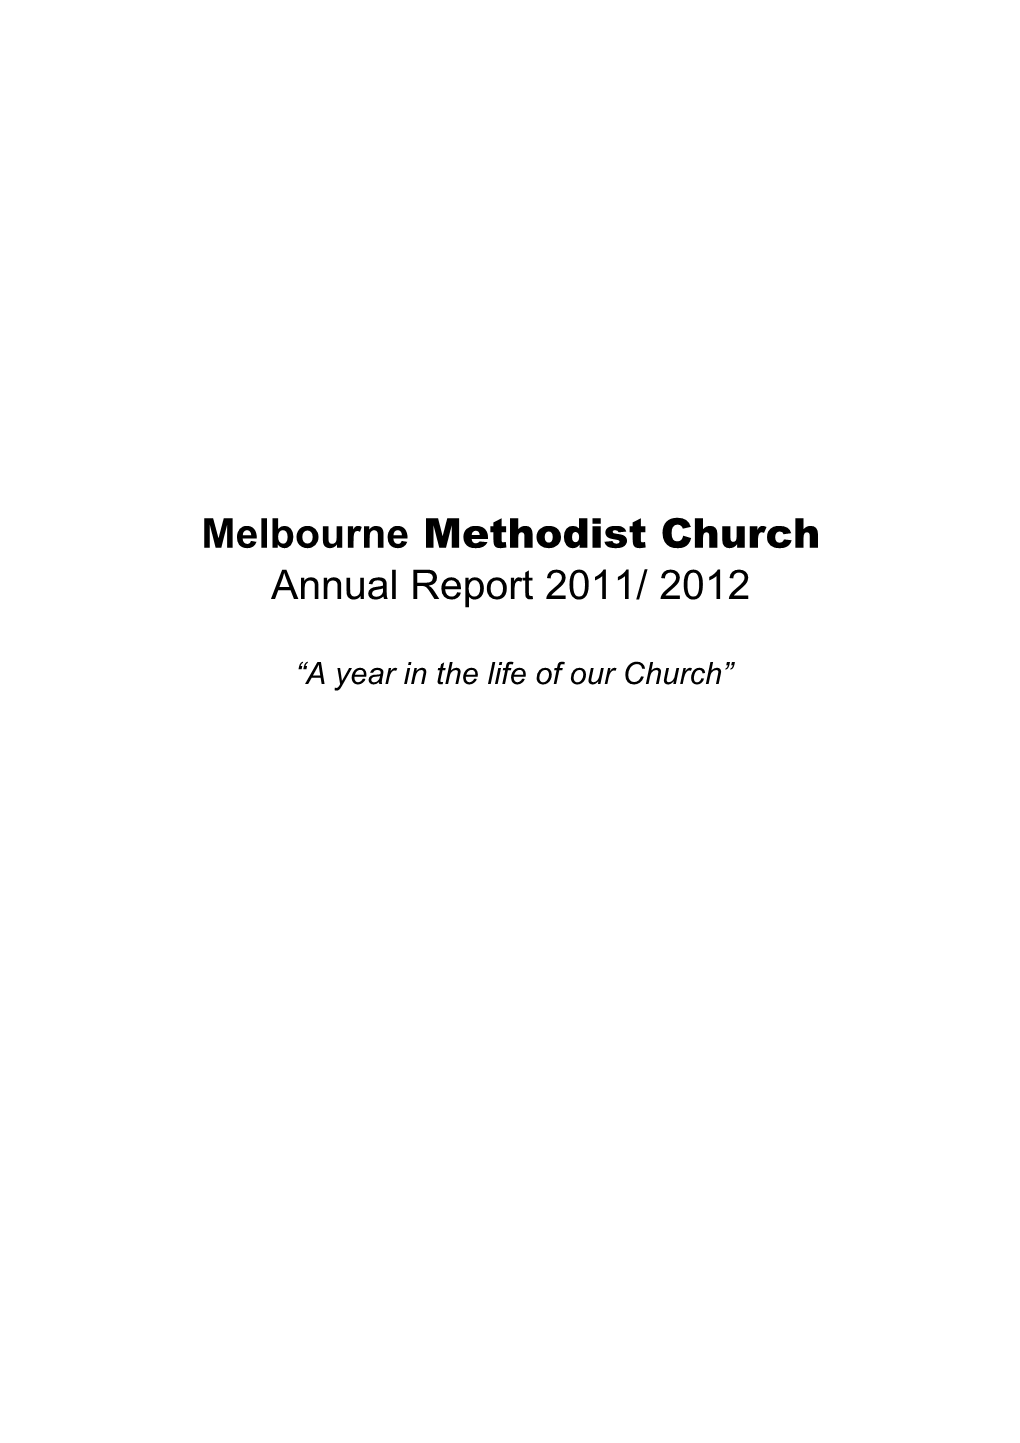 A Year in the Life of Our Church